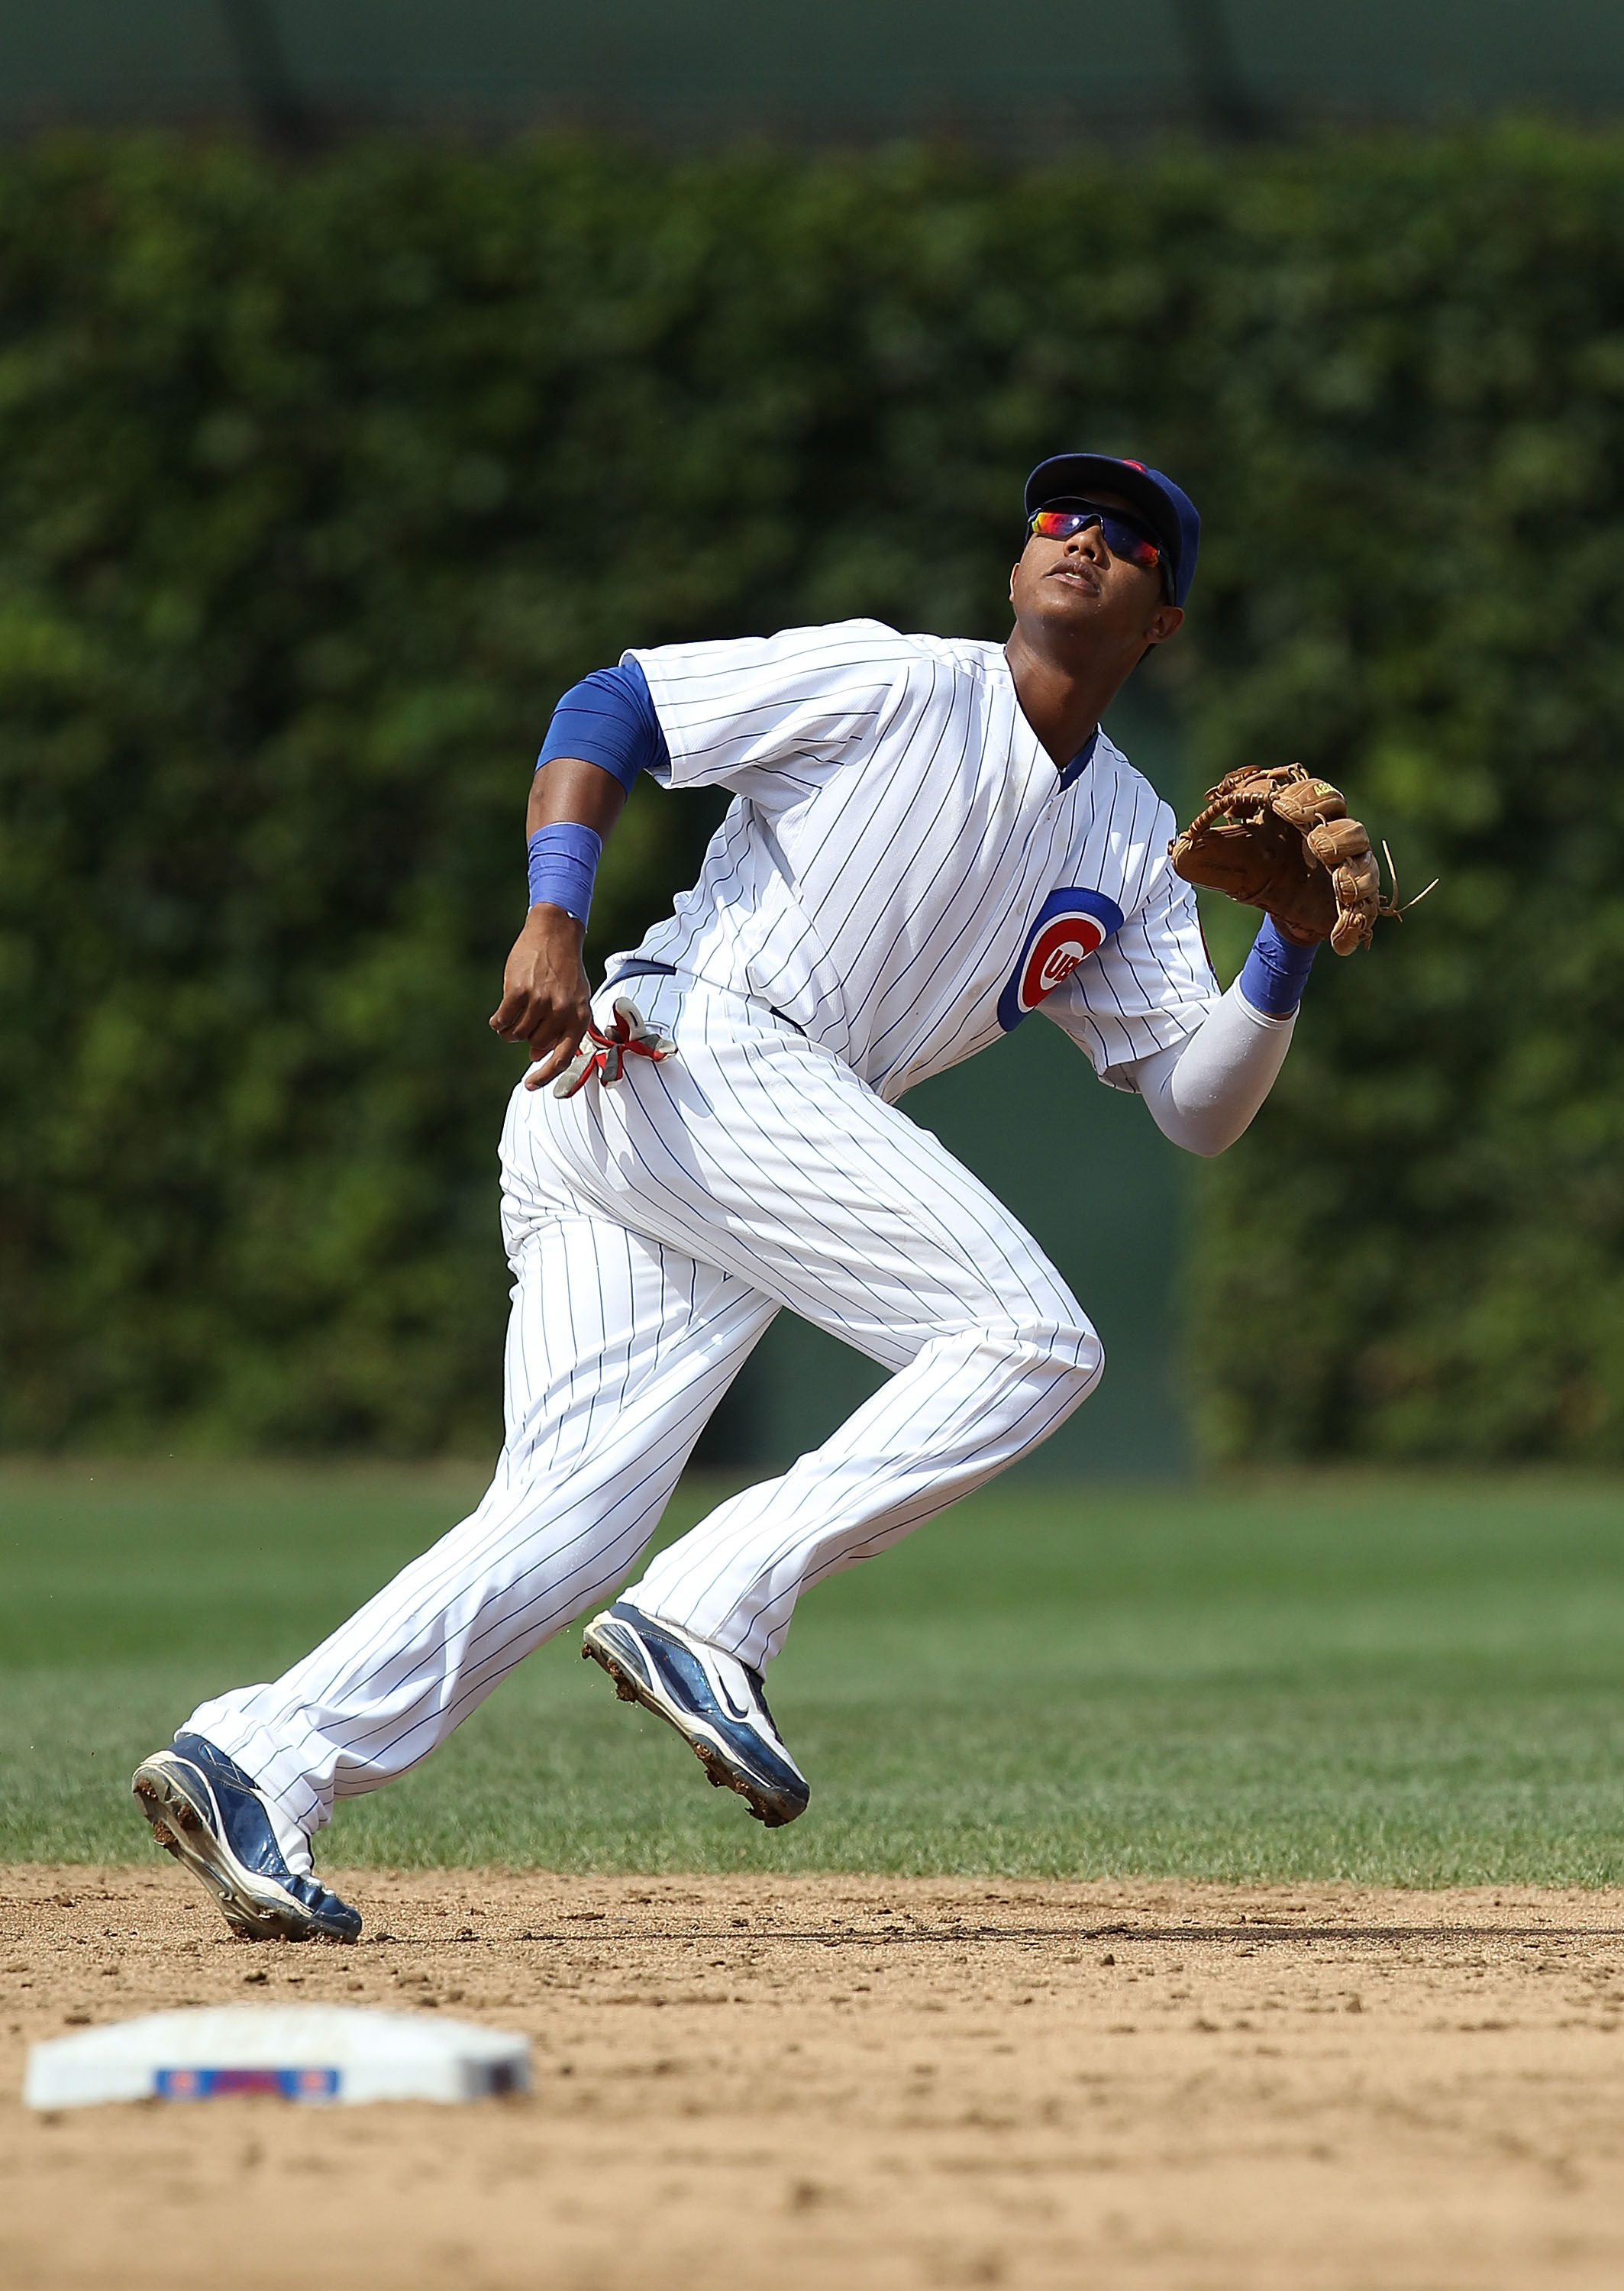 Should Chicago Cubs send Starlin Castro to minors?